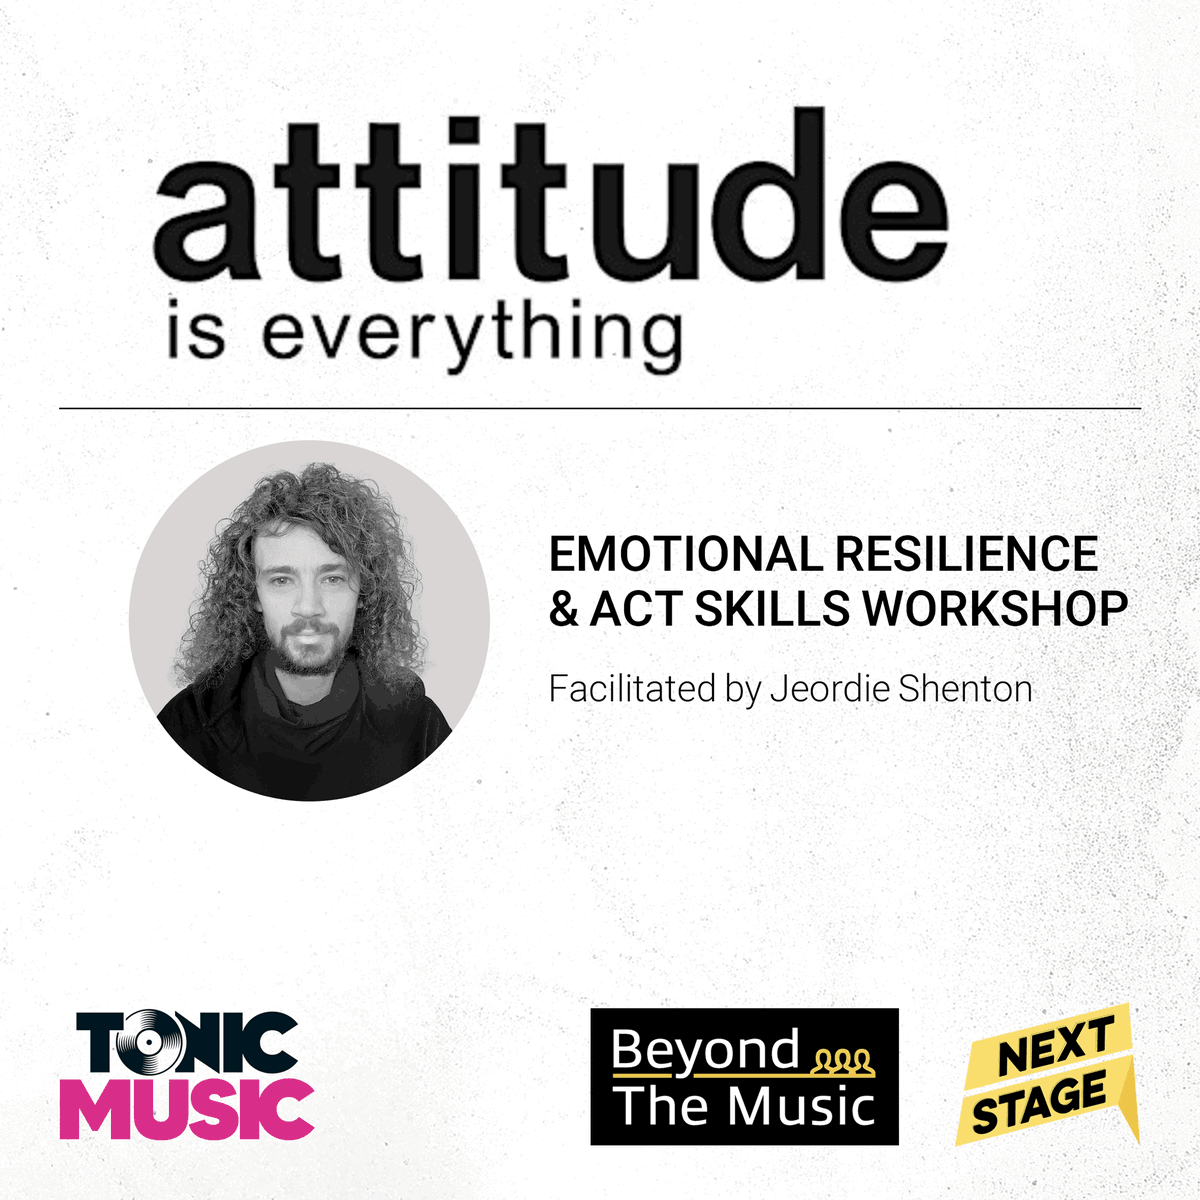 Join us on 19th June for an online workshop on Emotional Resilience & ACT Skills, as part of @attitudetweets Beyond The Music series.

For more information and to register, please visit tonicmusic.co.uk/post/aiew24

#TonicMusic #AttitudeIsEverything #MentalHealth #Wellbeng #Music